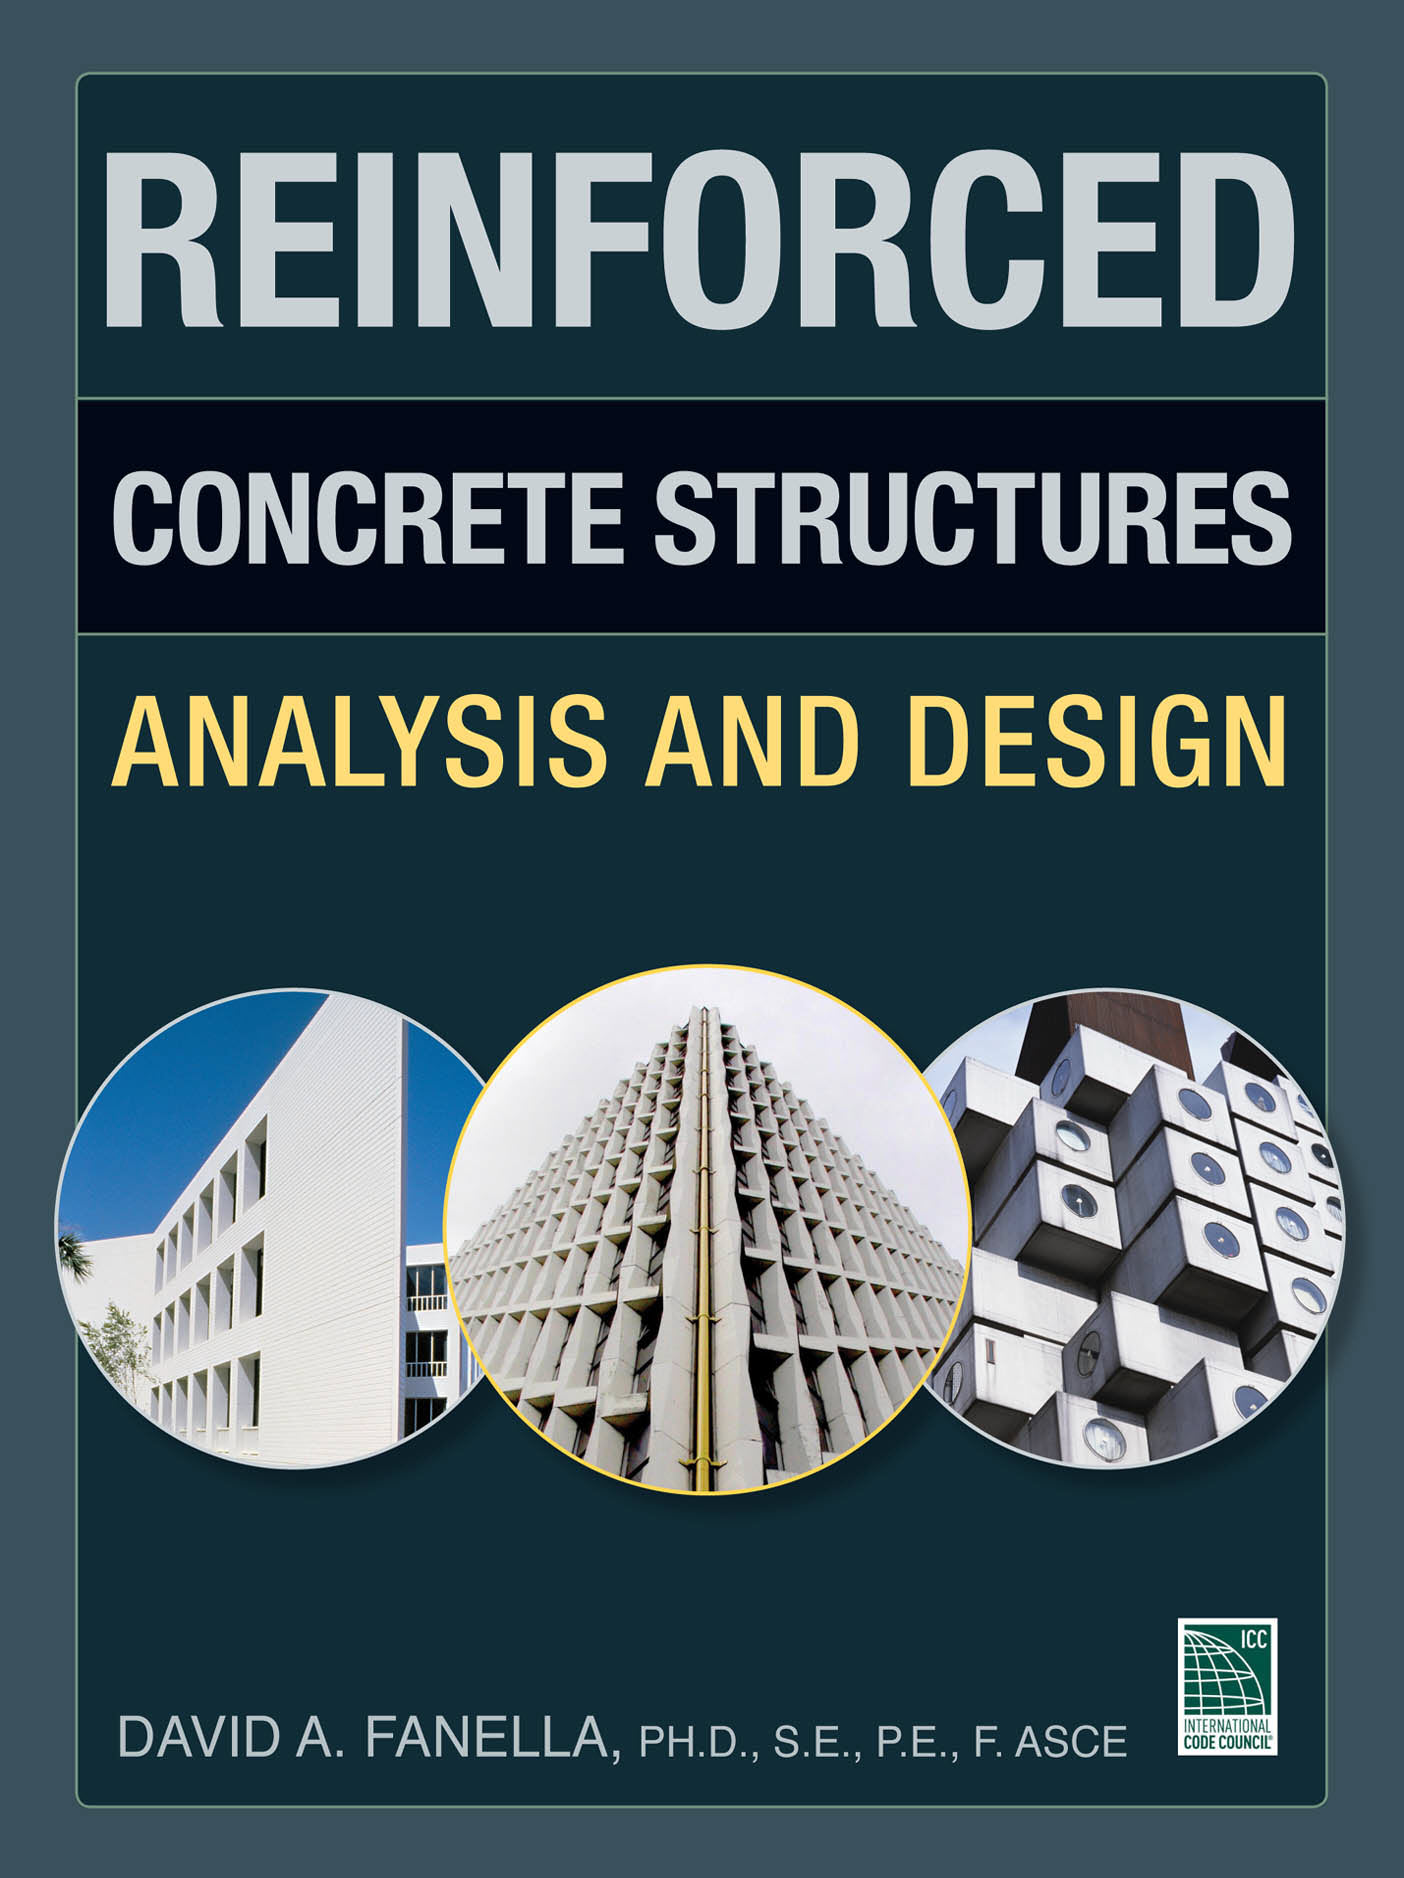 Reinforced Concrete Structures: Analysis and Design - Engineering Books